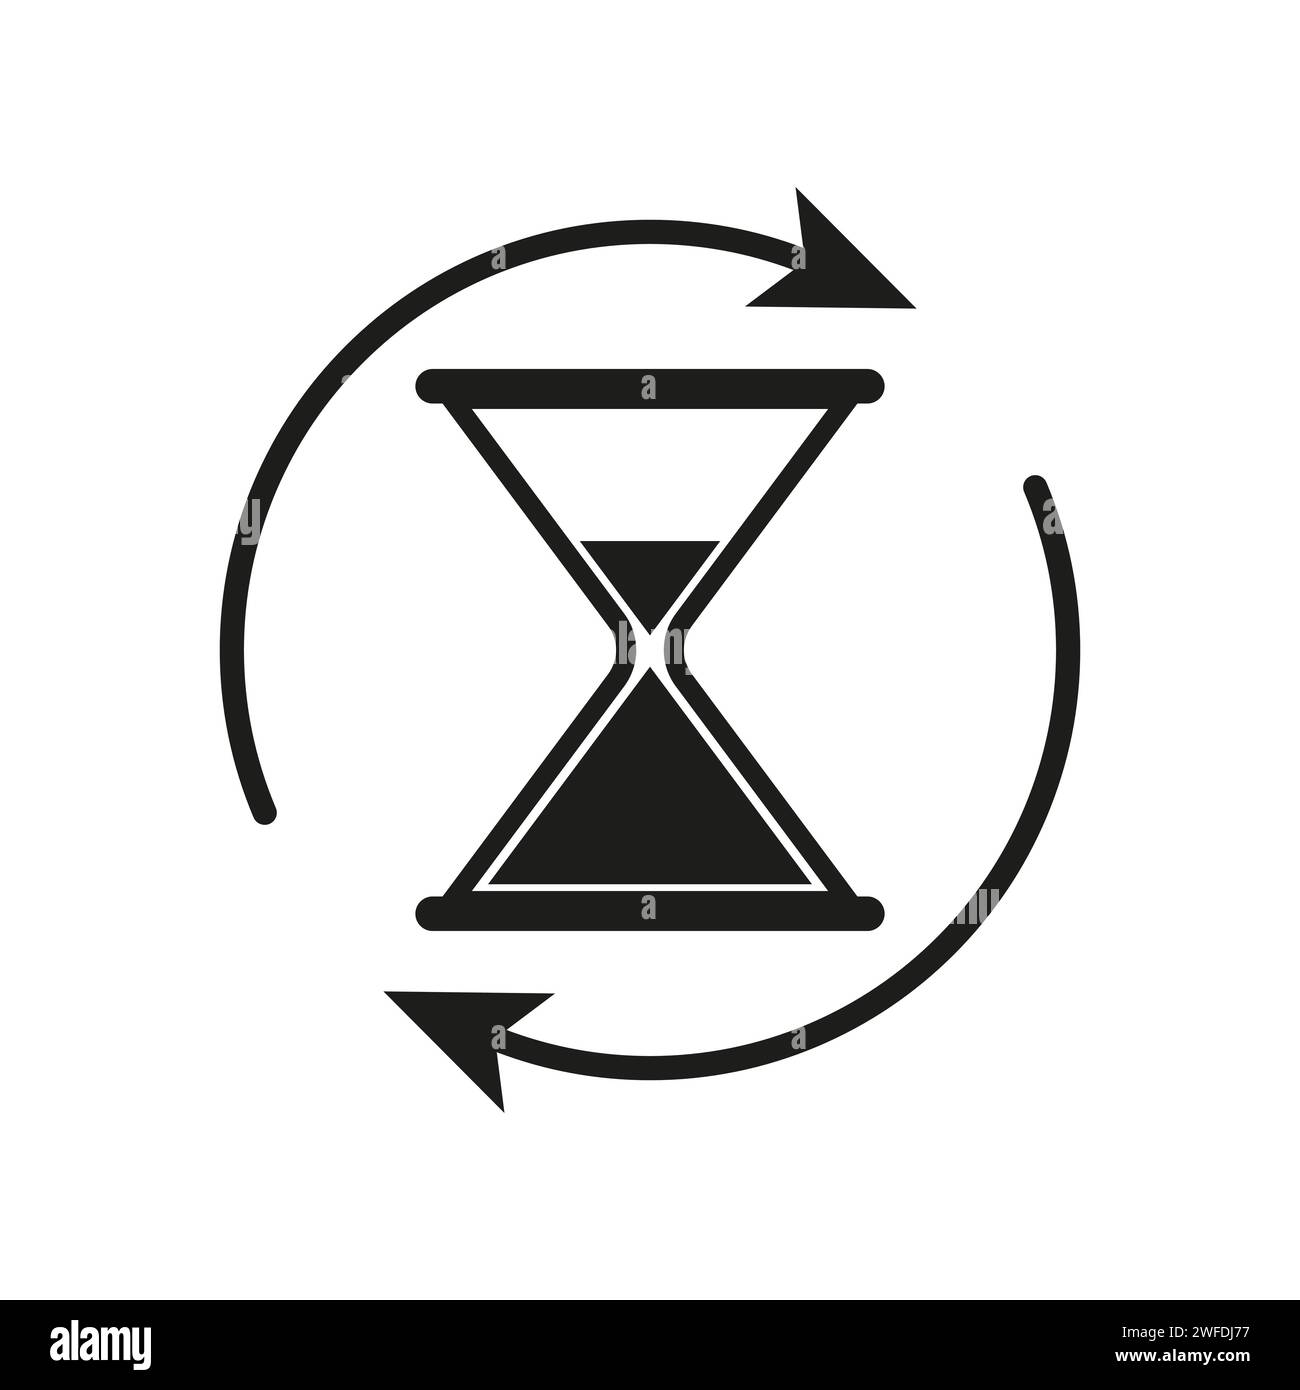 Hourglasses icon. Time icon. Vector illustration. EPS10. Stock image. Stock Vector